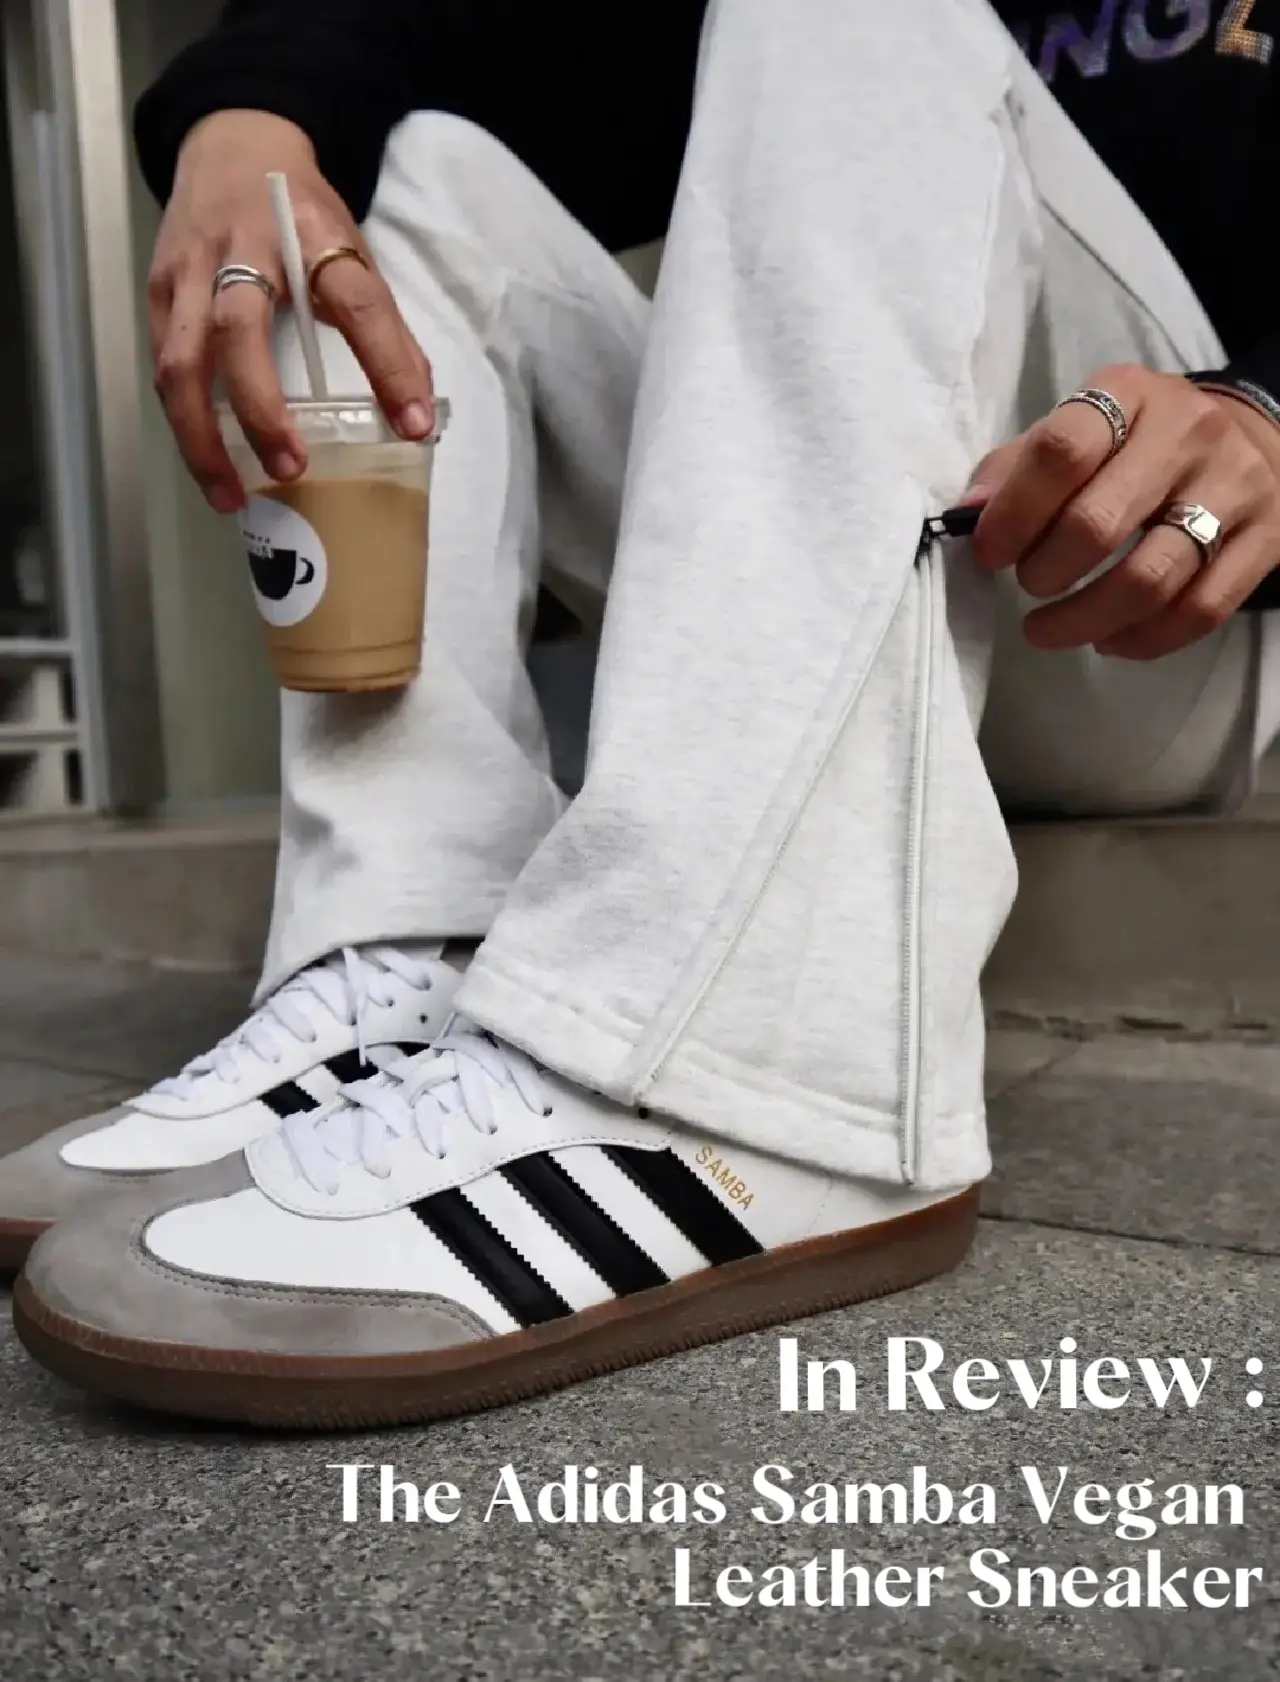 In Review: The Adidas Samba Vegan Leather Sneaker | Gallery posted by ...